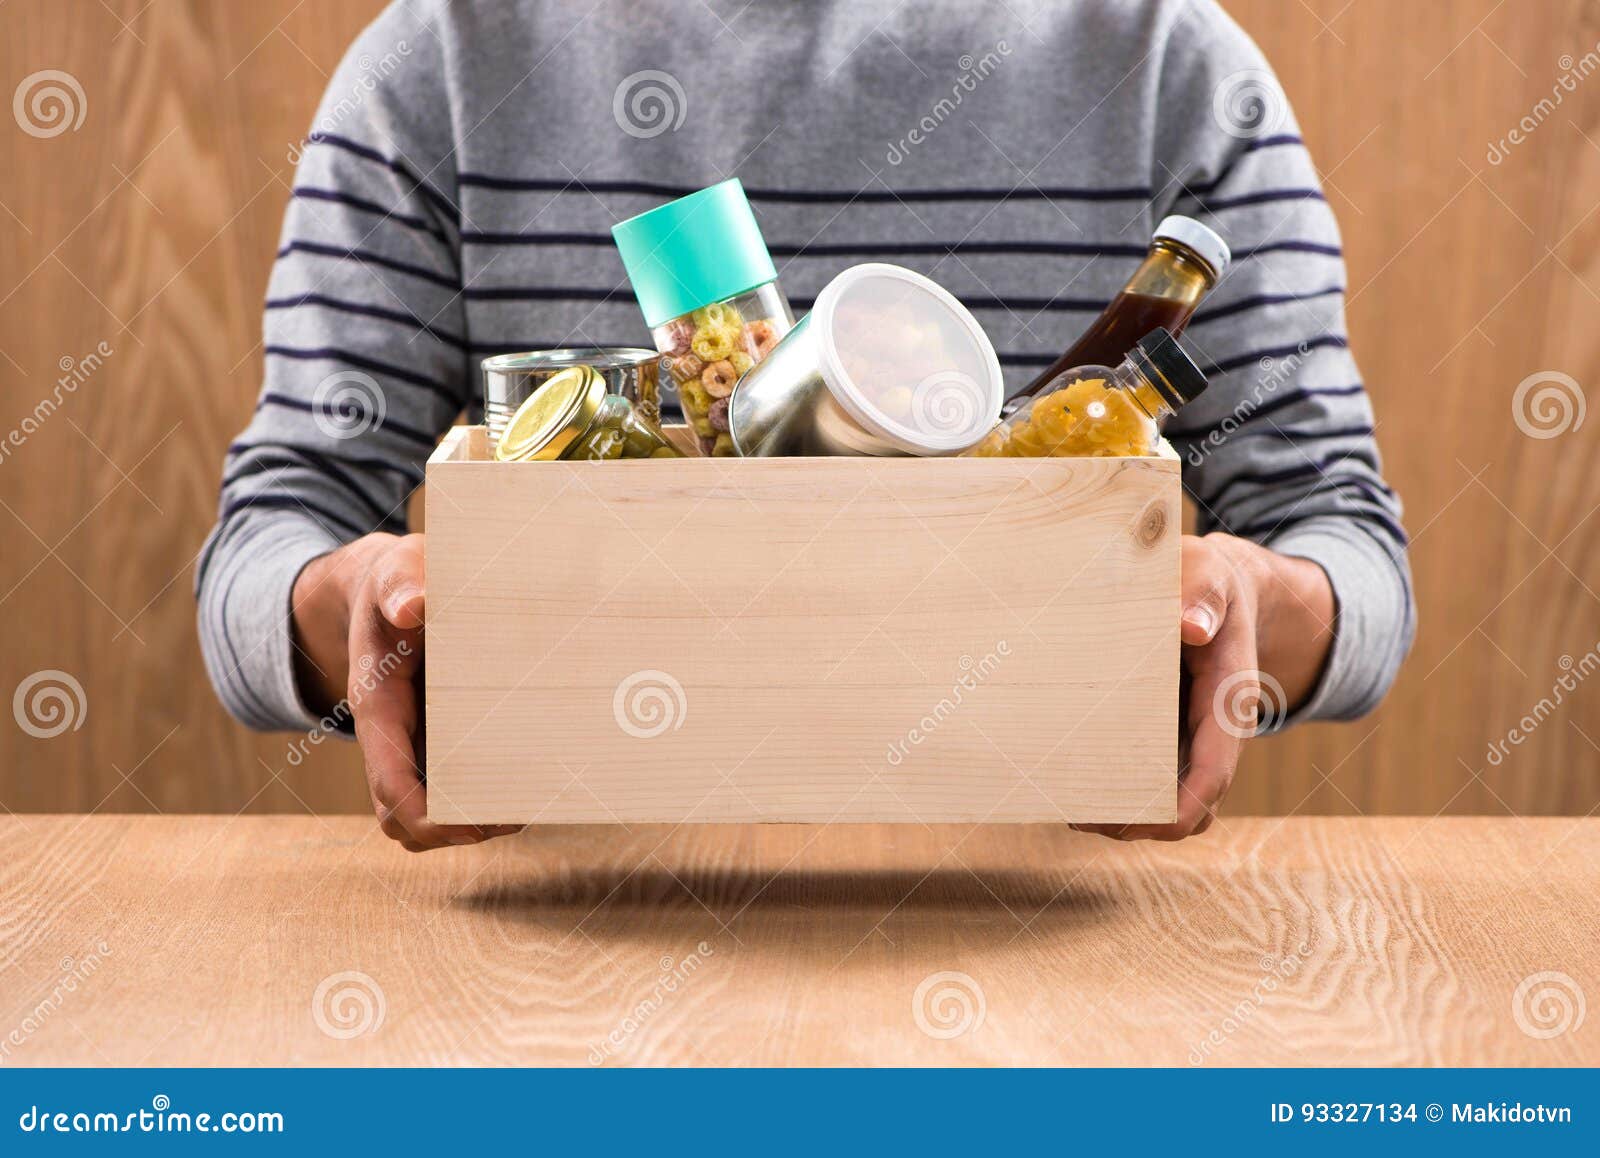 volunteer with donation box with foodstuffs on wooden background